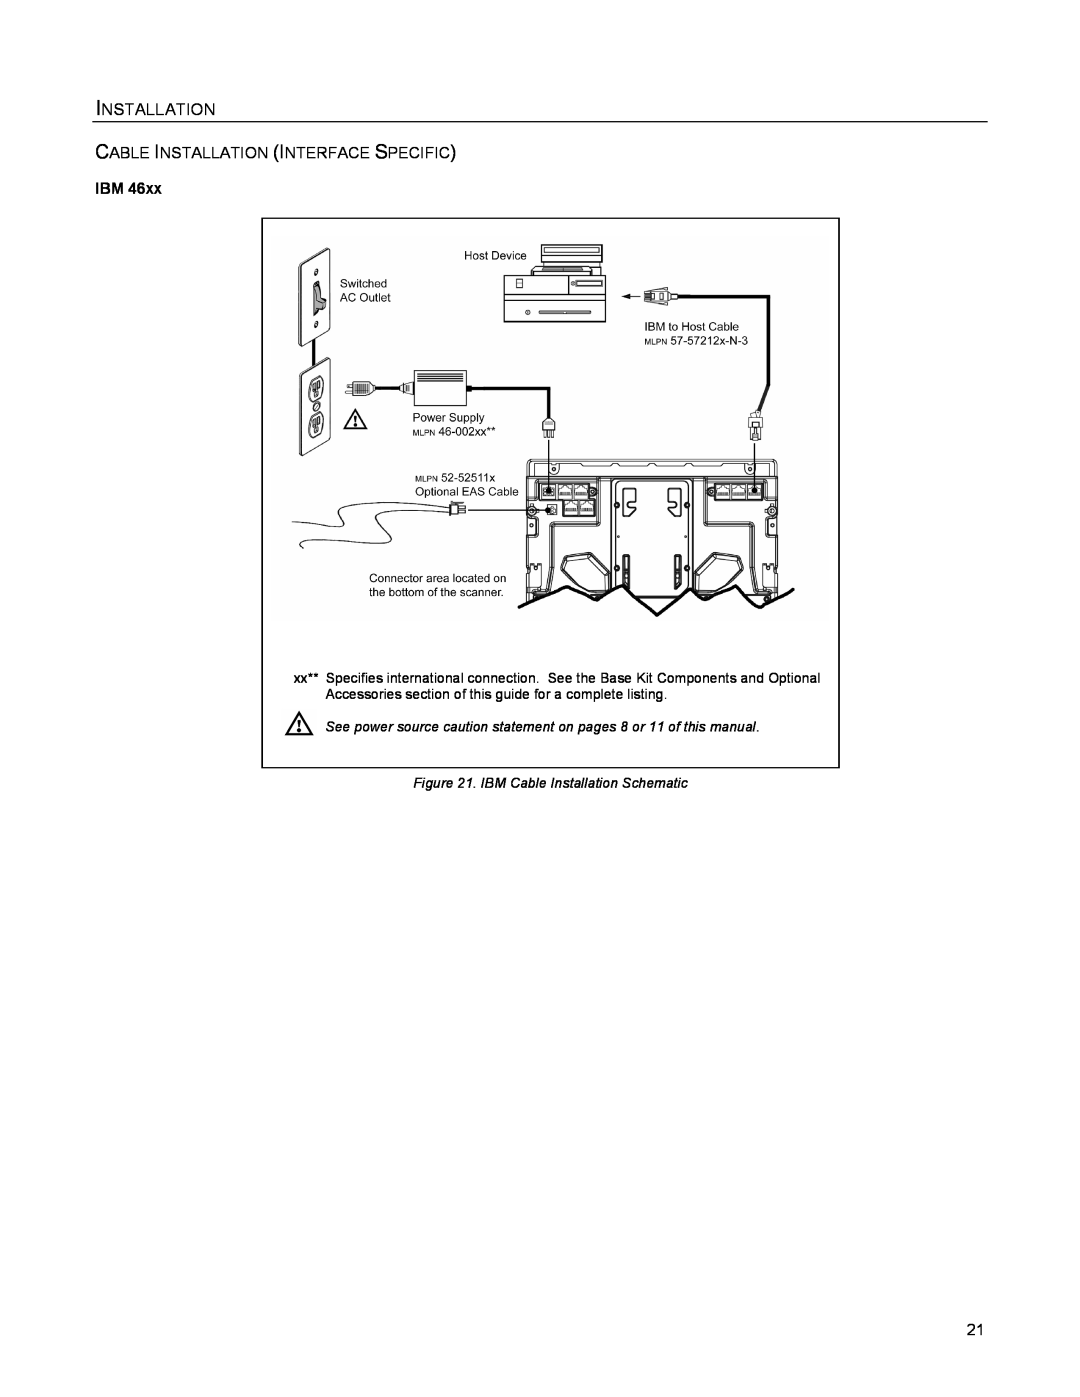 Metrologic Instruments MS2421, MS2422 Installation, See power source caution statement on pages 8 or 11 of this manual 